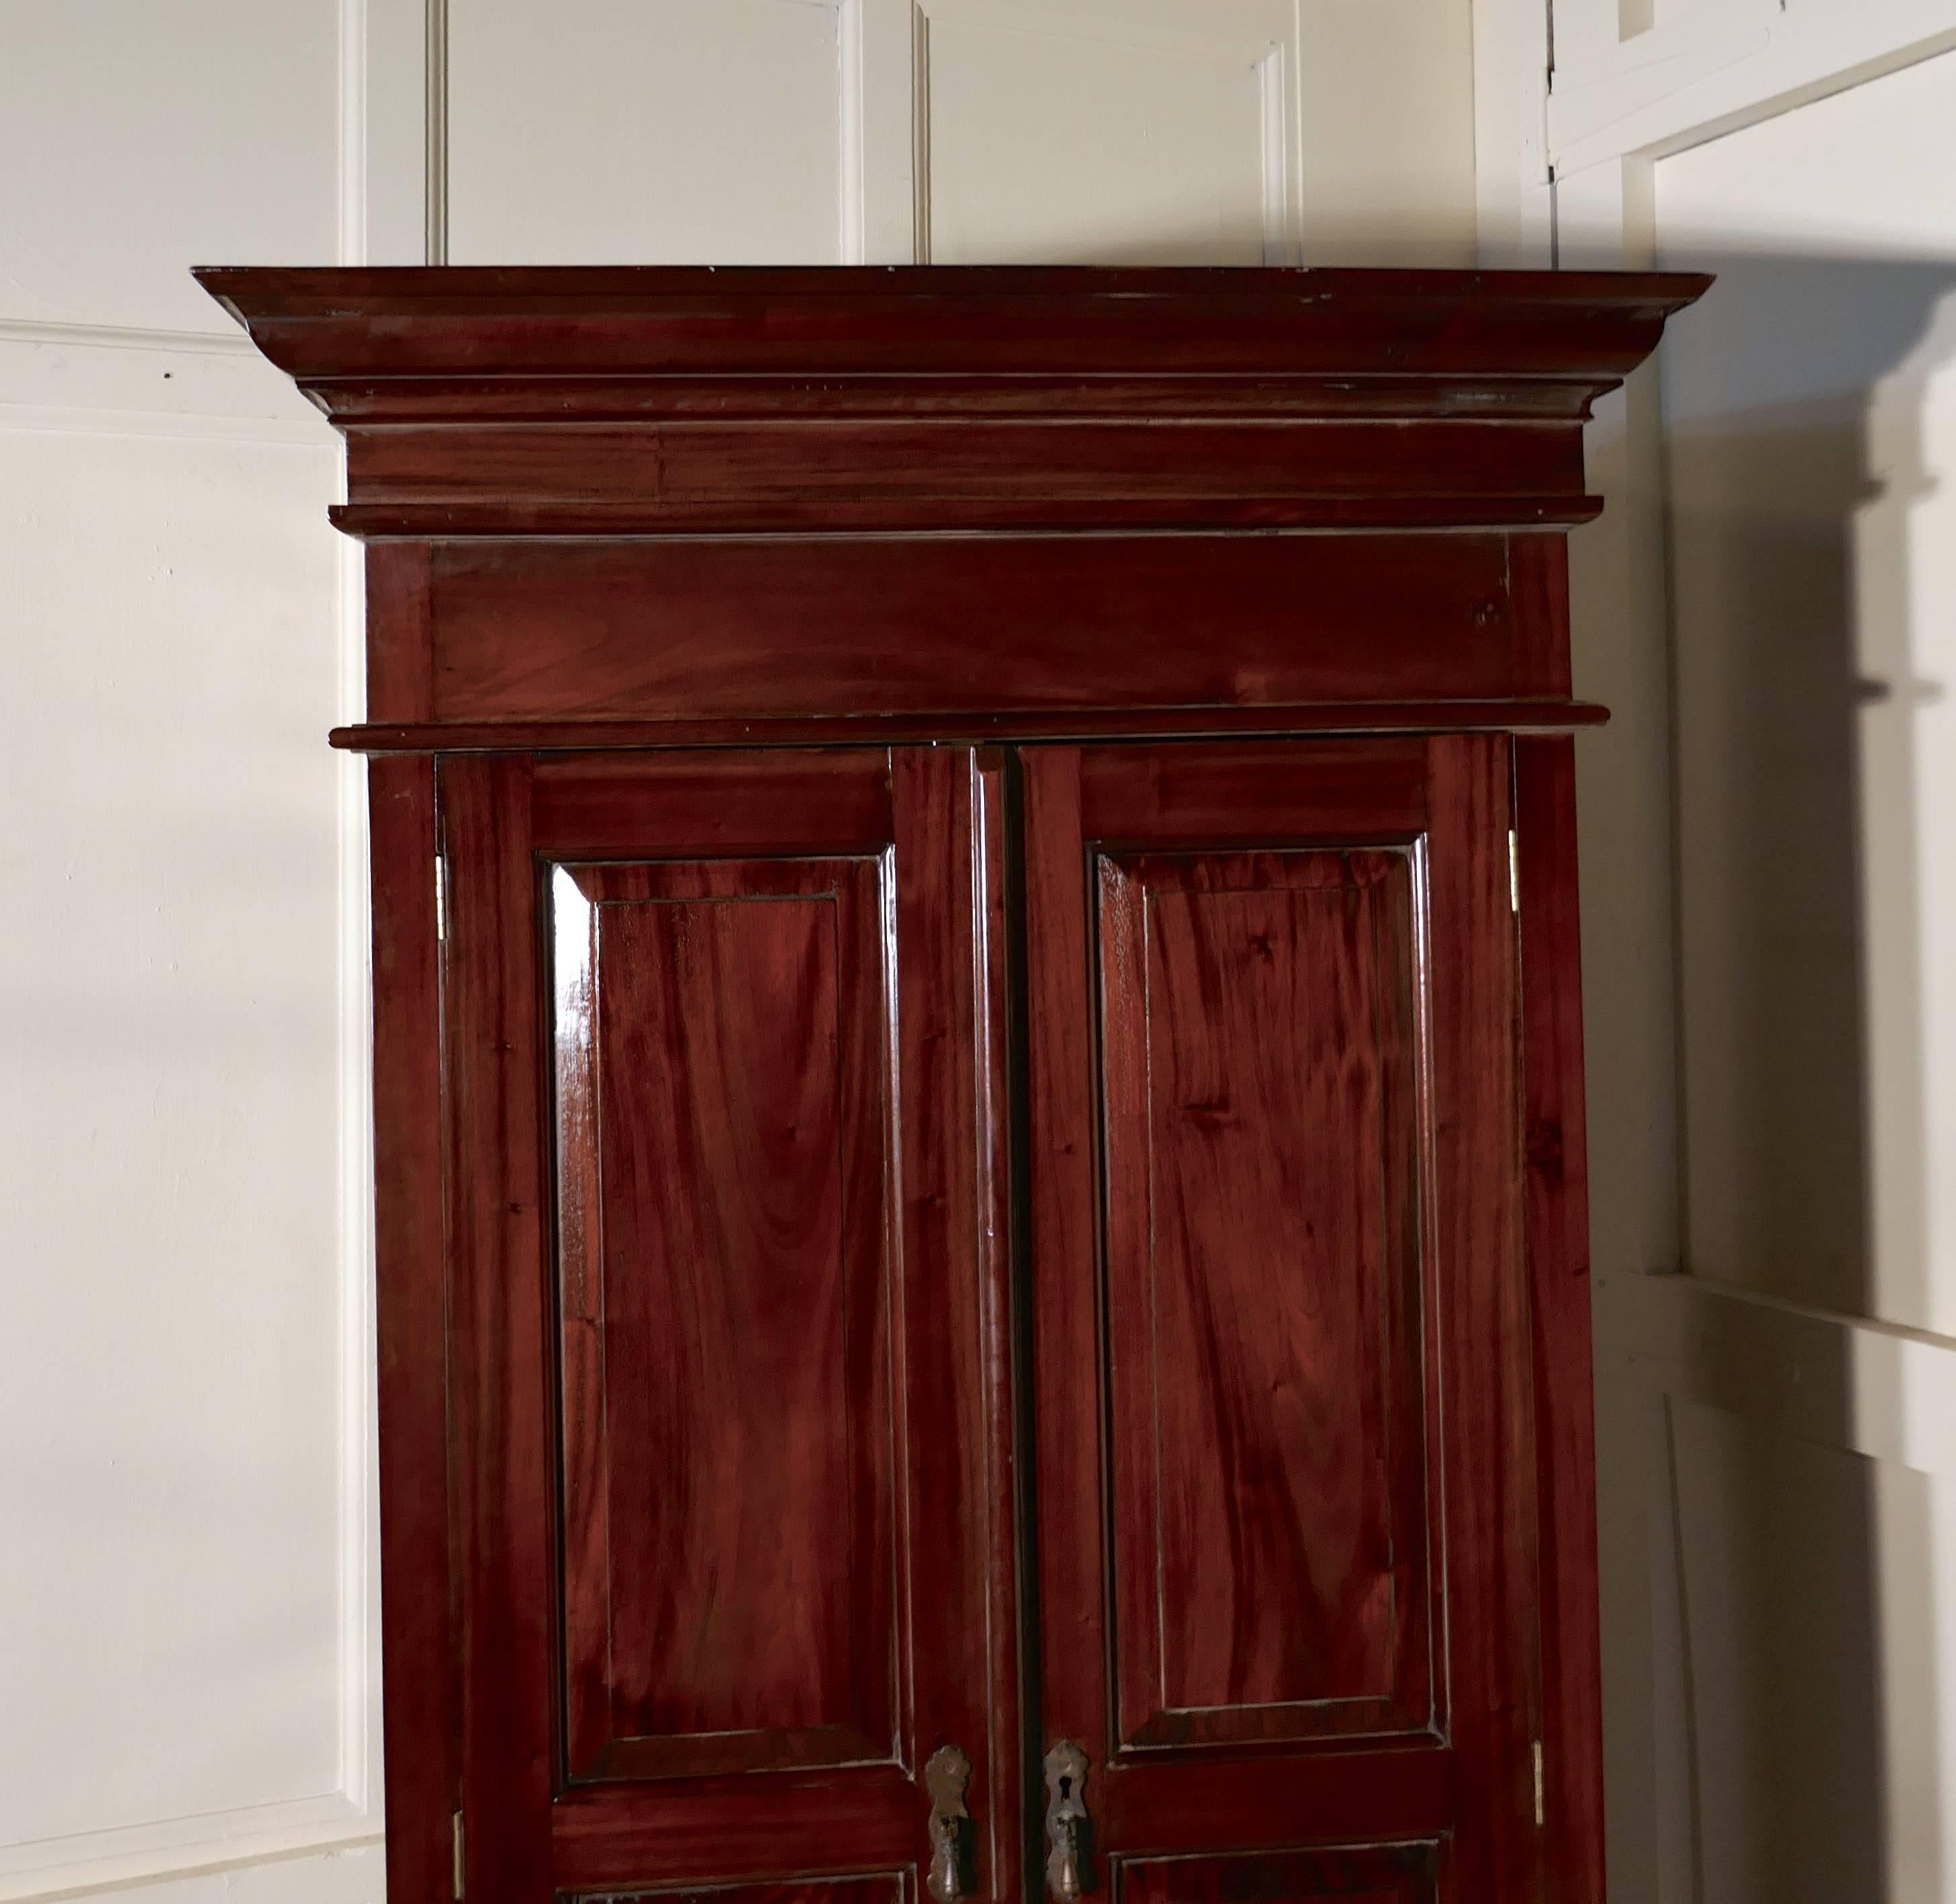 A solid mahogany shelved armoire hanging wardrobe 

This is a very attractive piece, the mahogany wardrobe is a good quality piece, it has two panelled doors, two drawers at the bottom and an outward sweeping cornice

The interior has adjustable